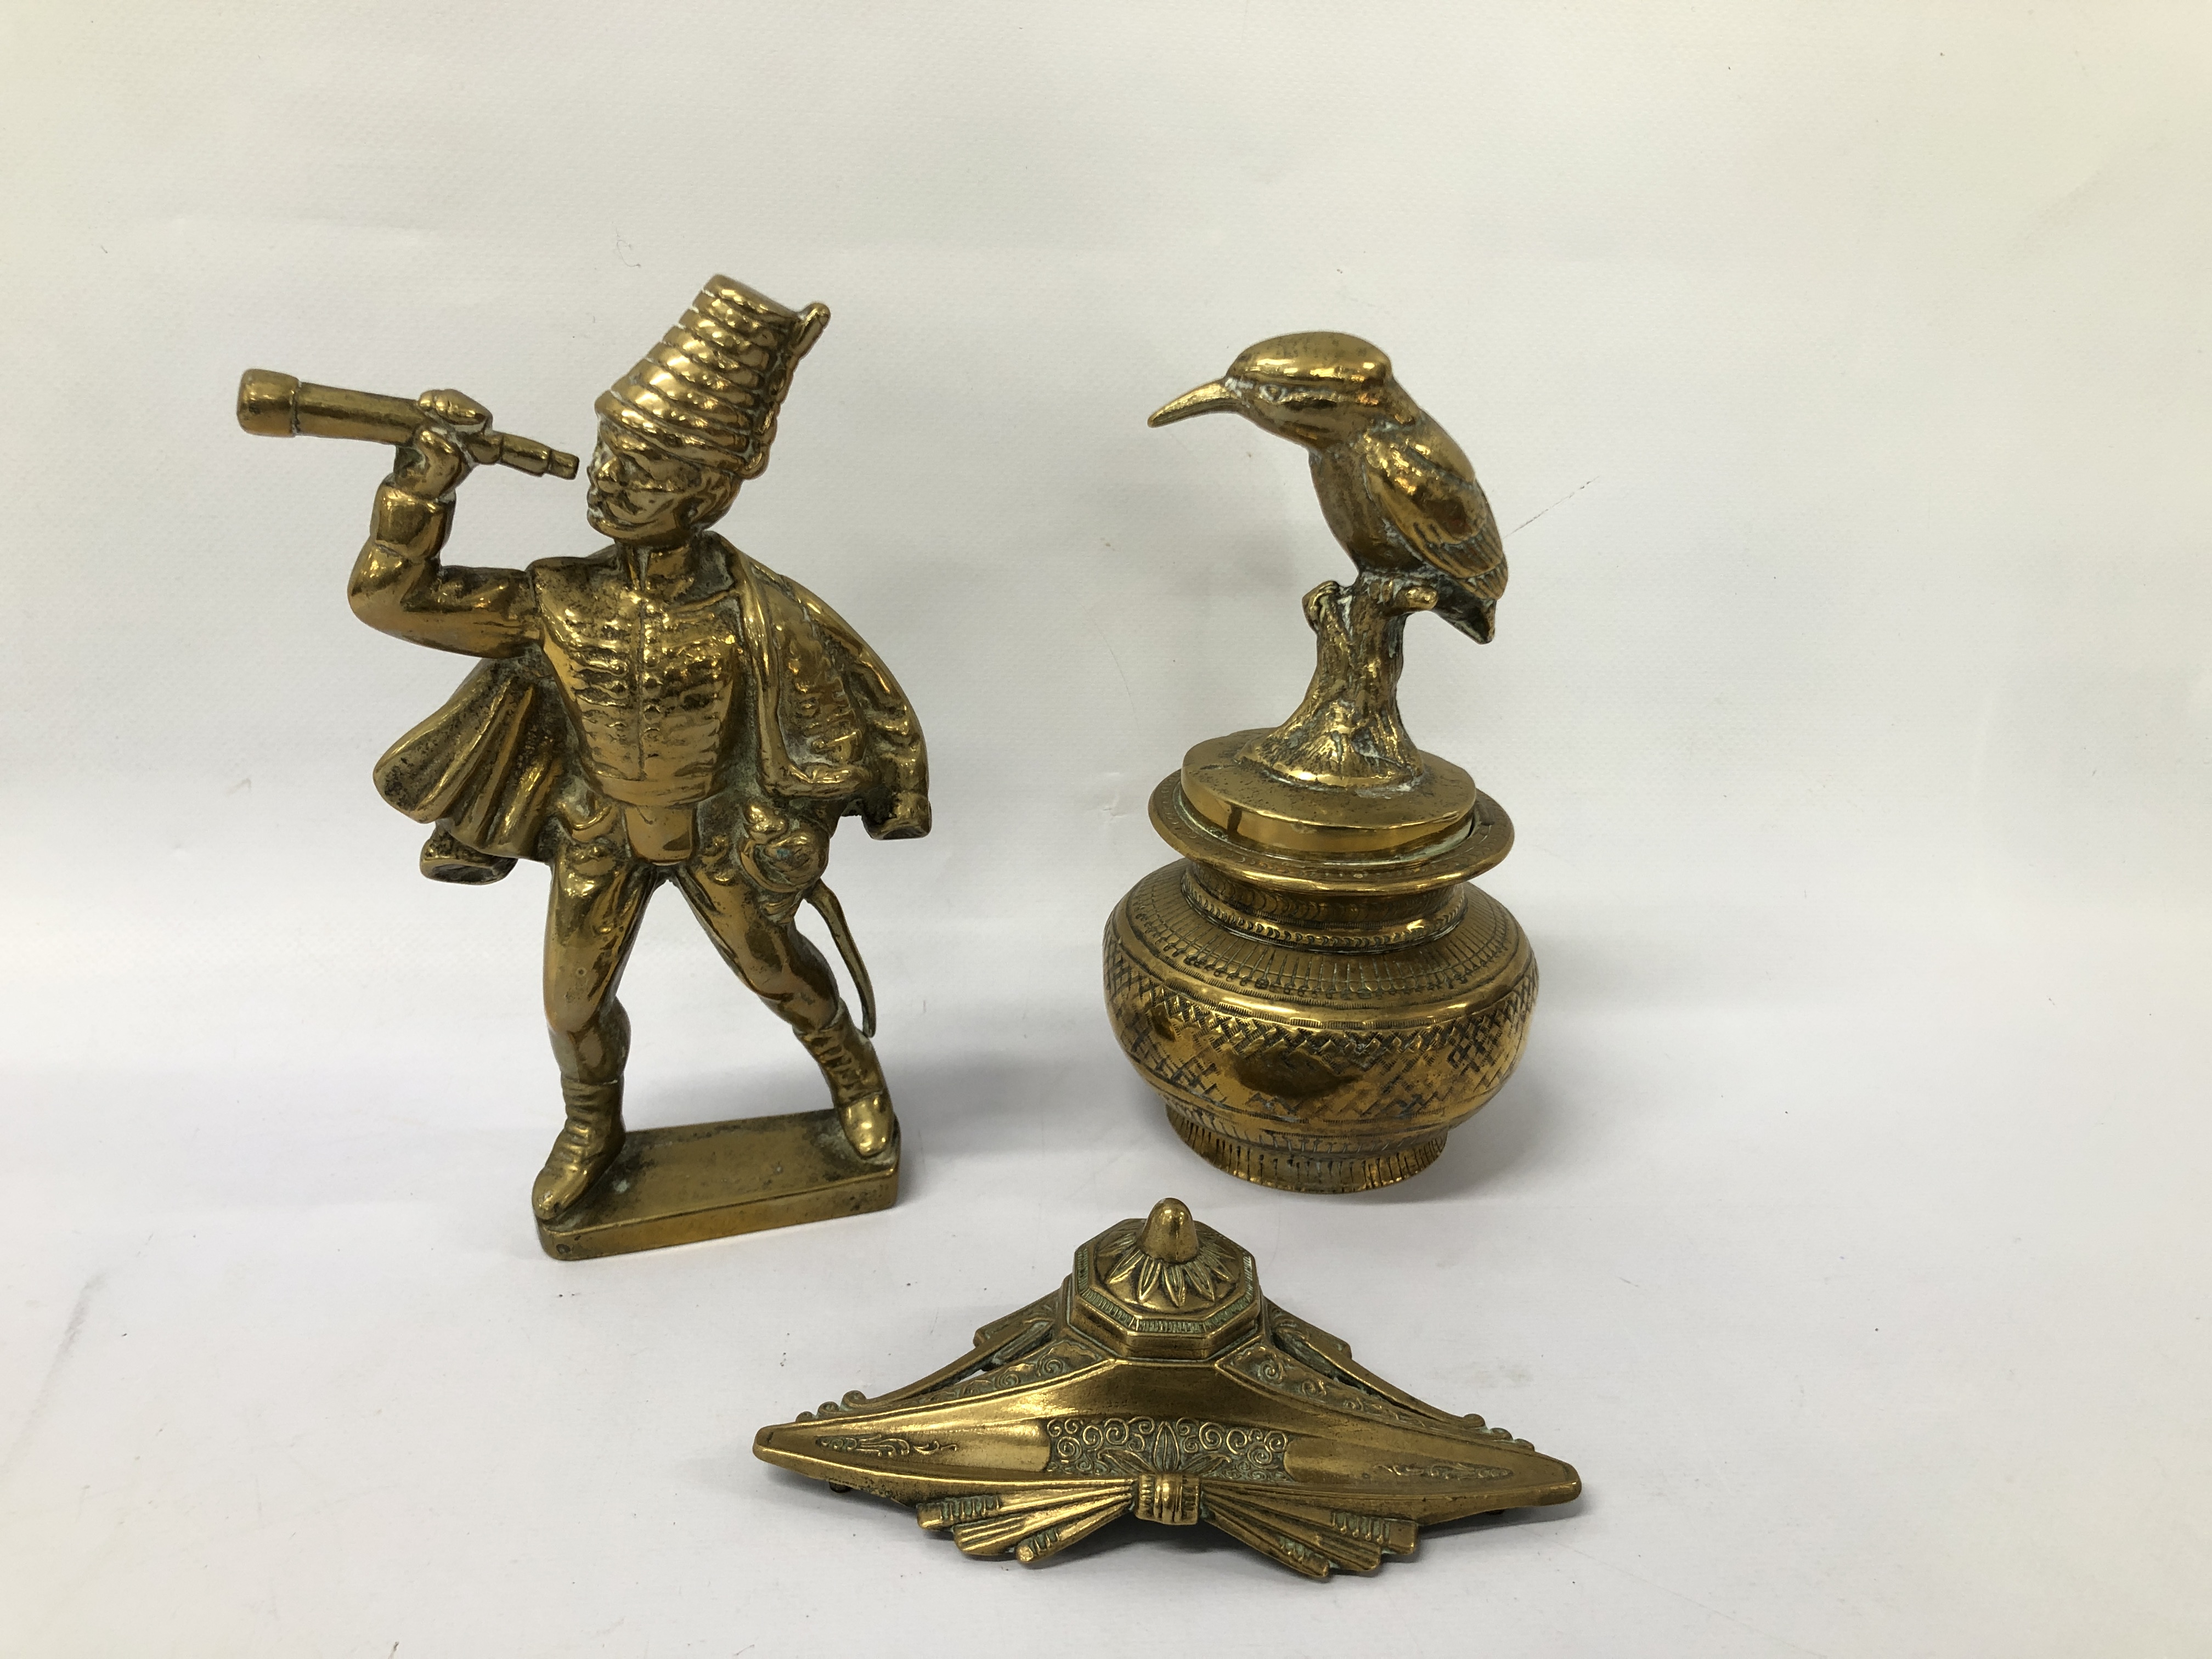 DECORATIVE BRASS INKWELL, HEAVY BRASS KINGFISHER ORNAMENT ON A DECORATIVE ENGRAVED BASE,